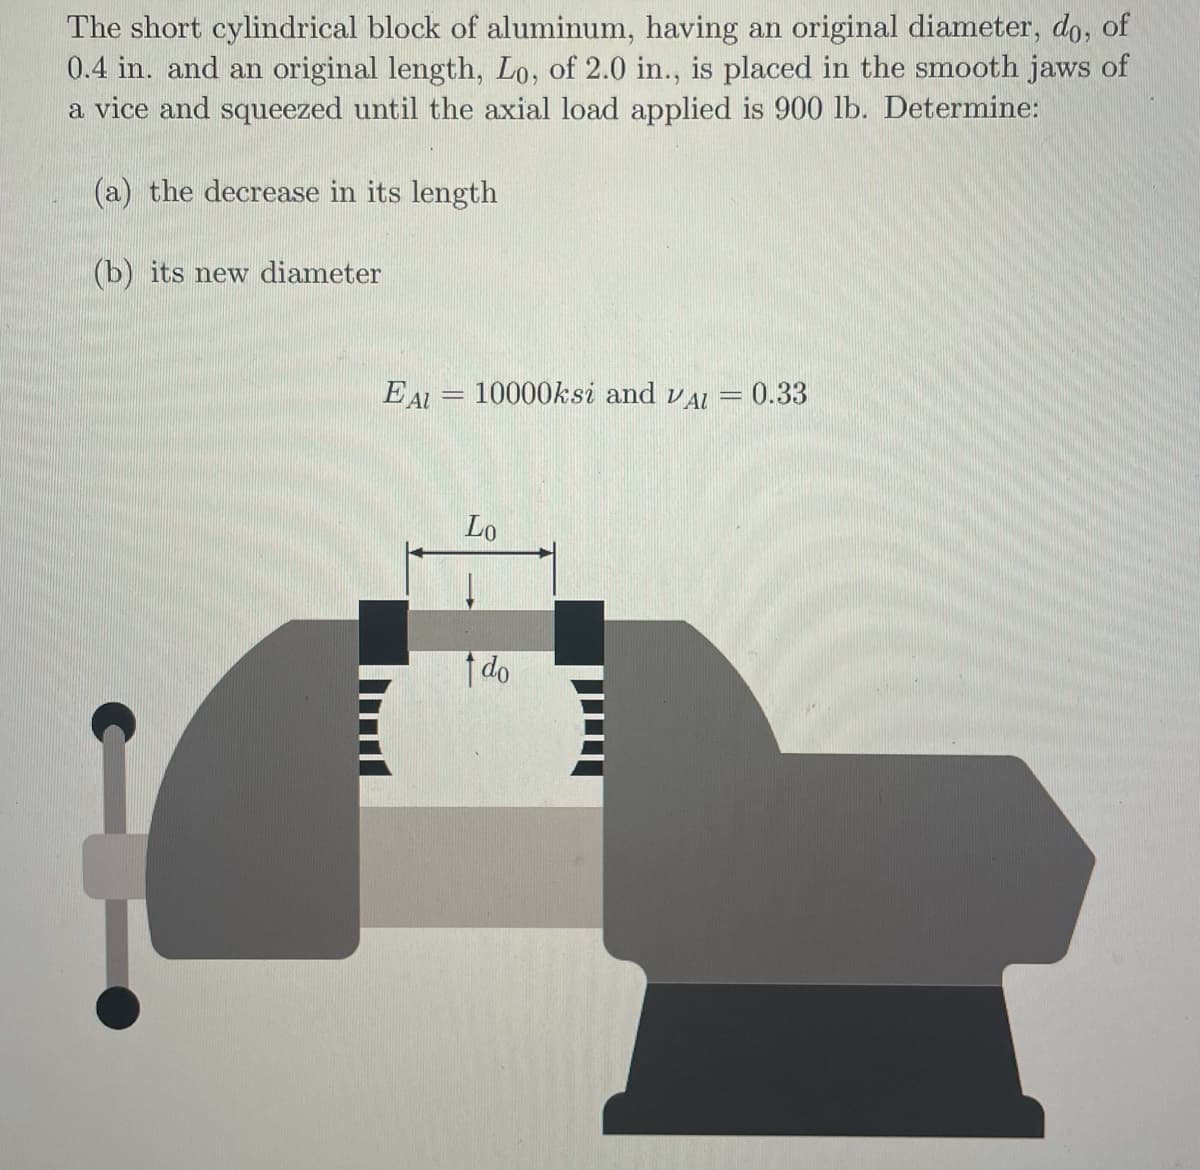 The short cylindrical block of aluminum, having an original diameter, do, of
0.4 in. and an original length, Lo, of 2.0 in., is placed in the smooth jaws of
a vice and squeezed until the axial load applied is 900 lb. Determine:
(a) the decrease in its length
(b) its new diameter
EAL = 10000ksi and vAL = 0.33
Lo
do
